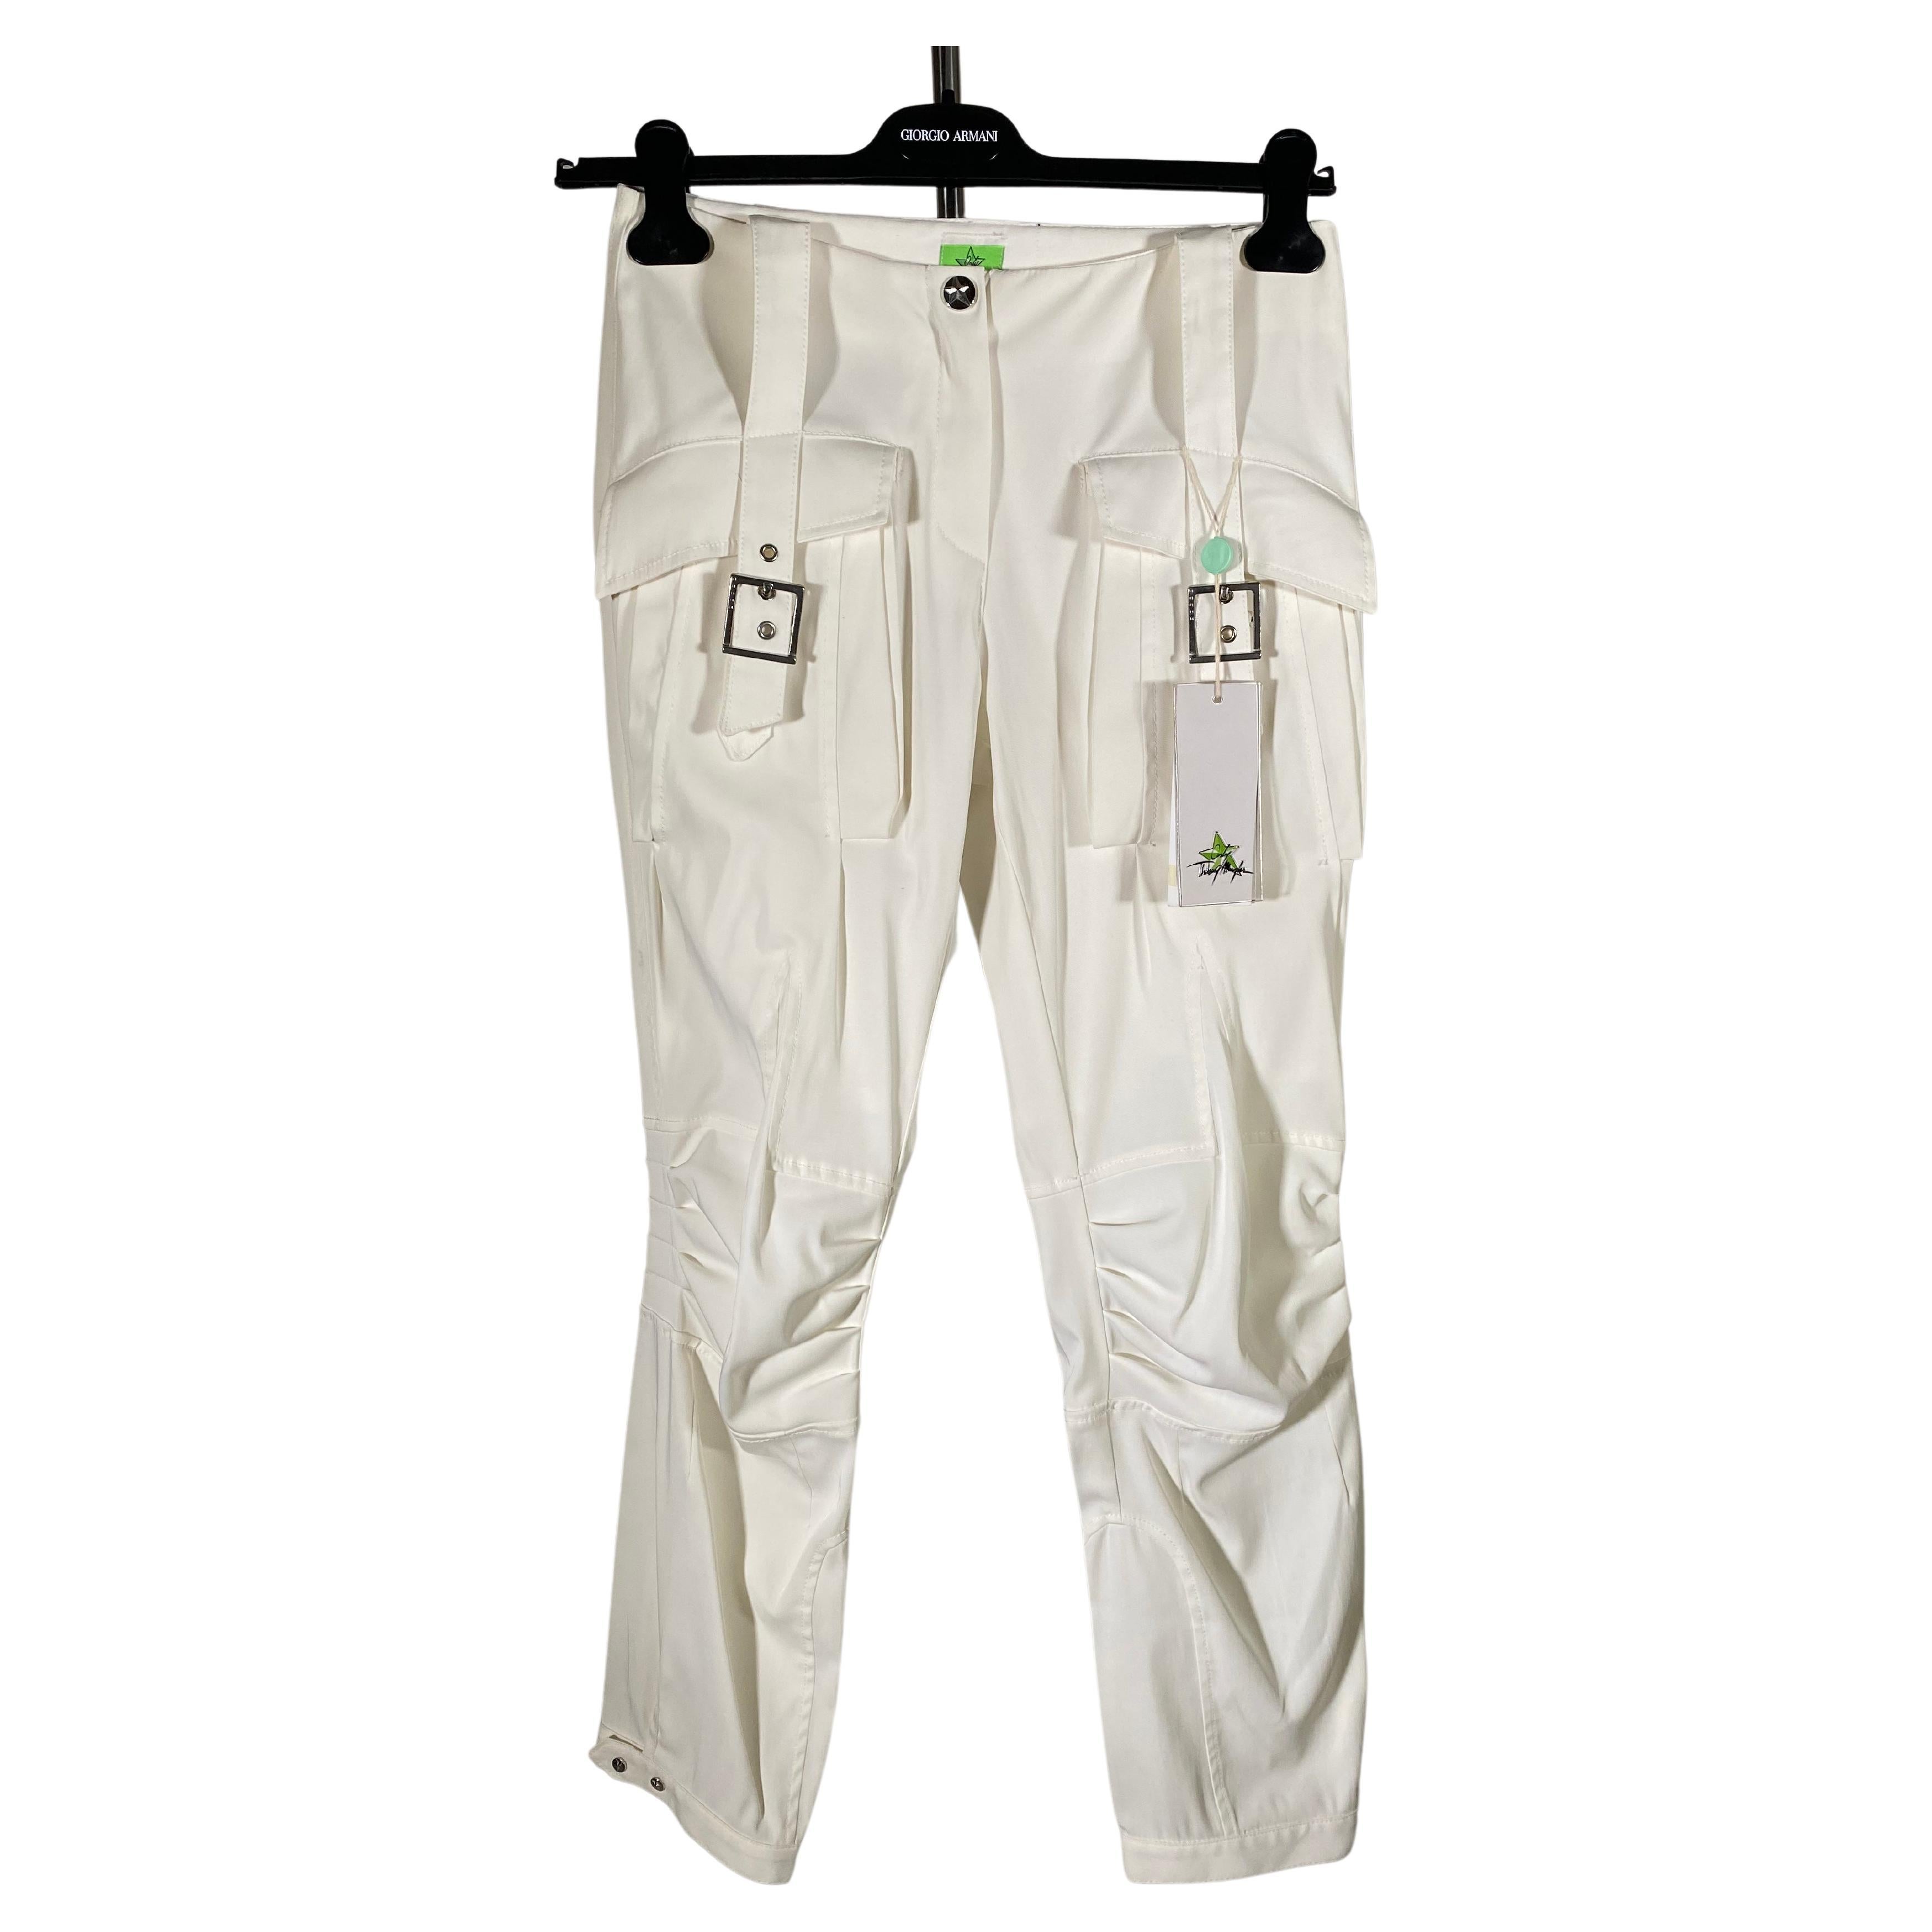 Rare Label Thierry Mugler Cargo Pants Vintage For Sale